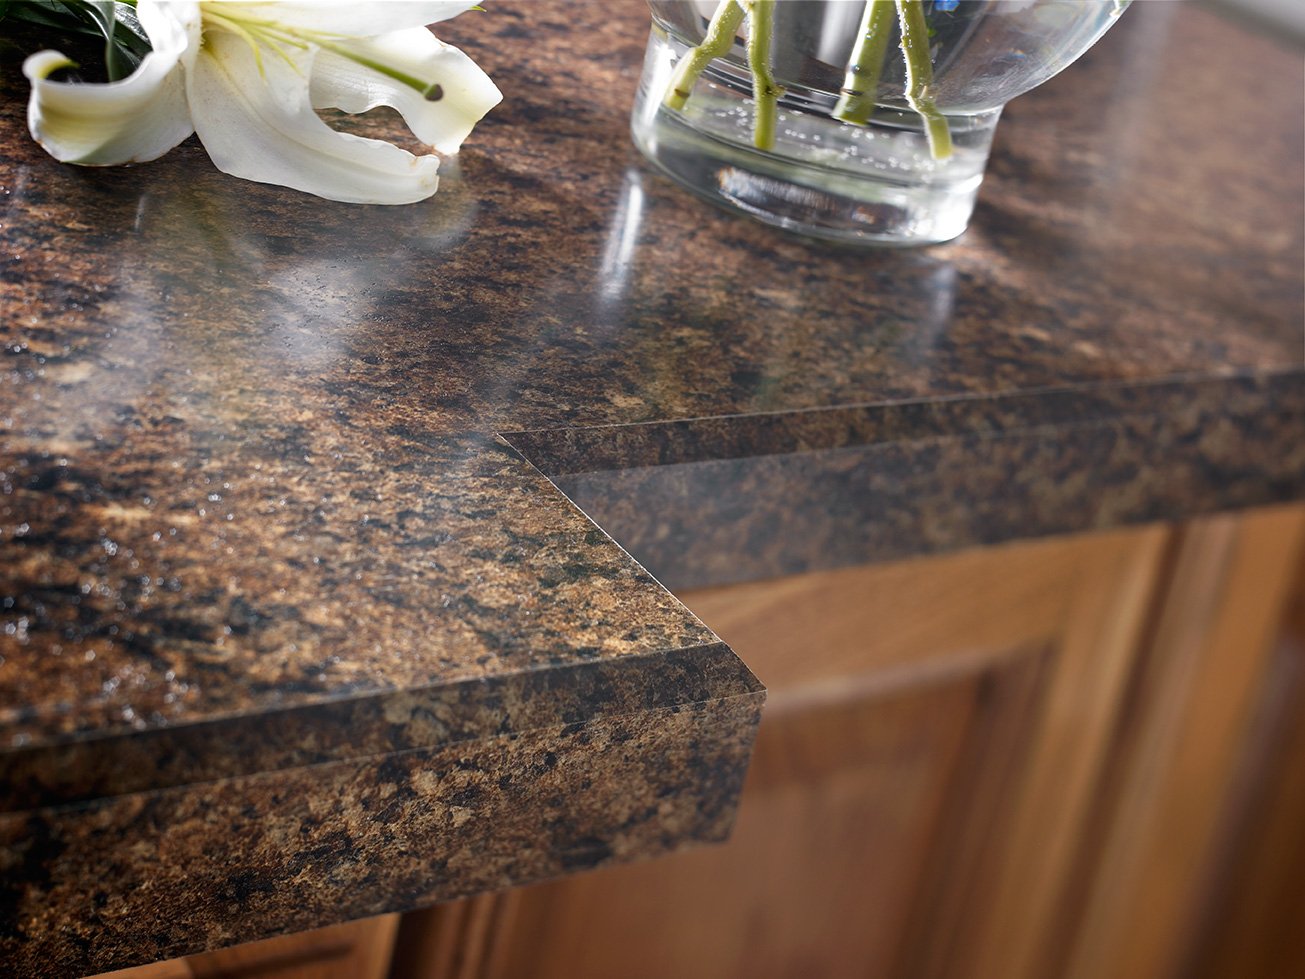 laminate countertop with a natural stone appearance